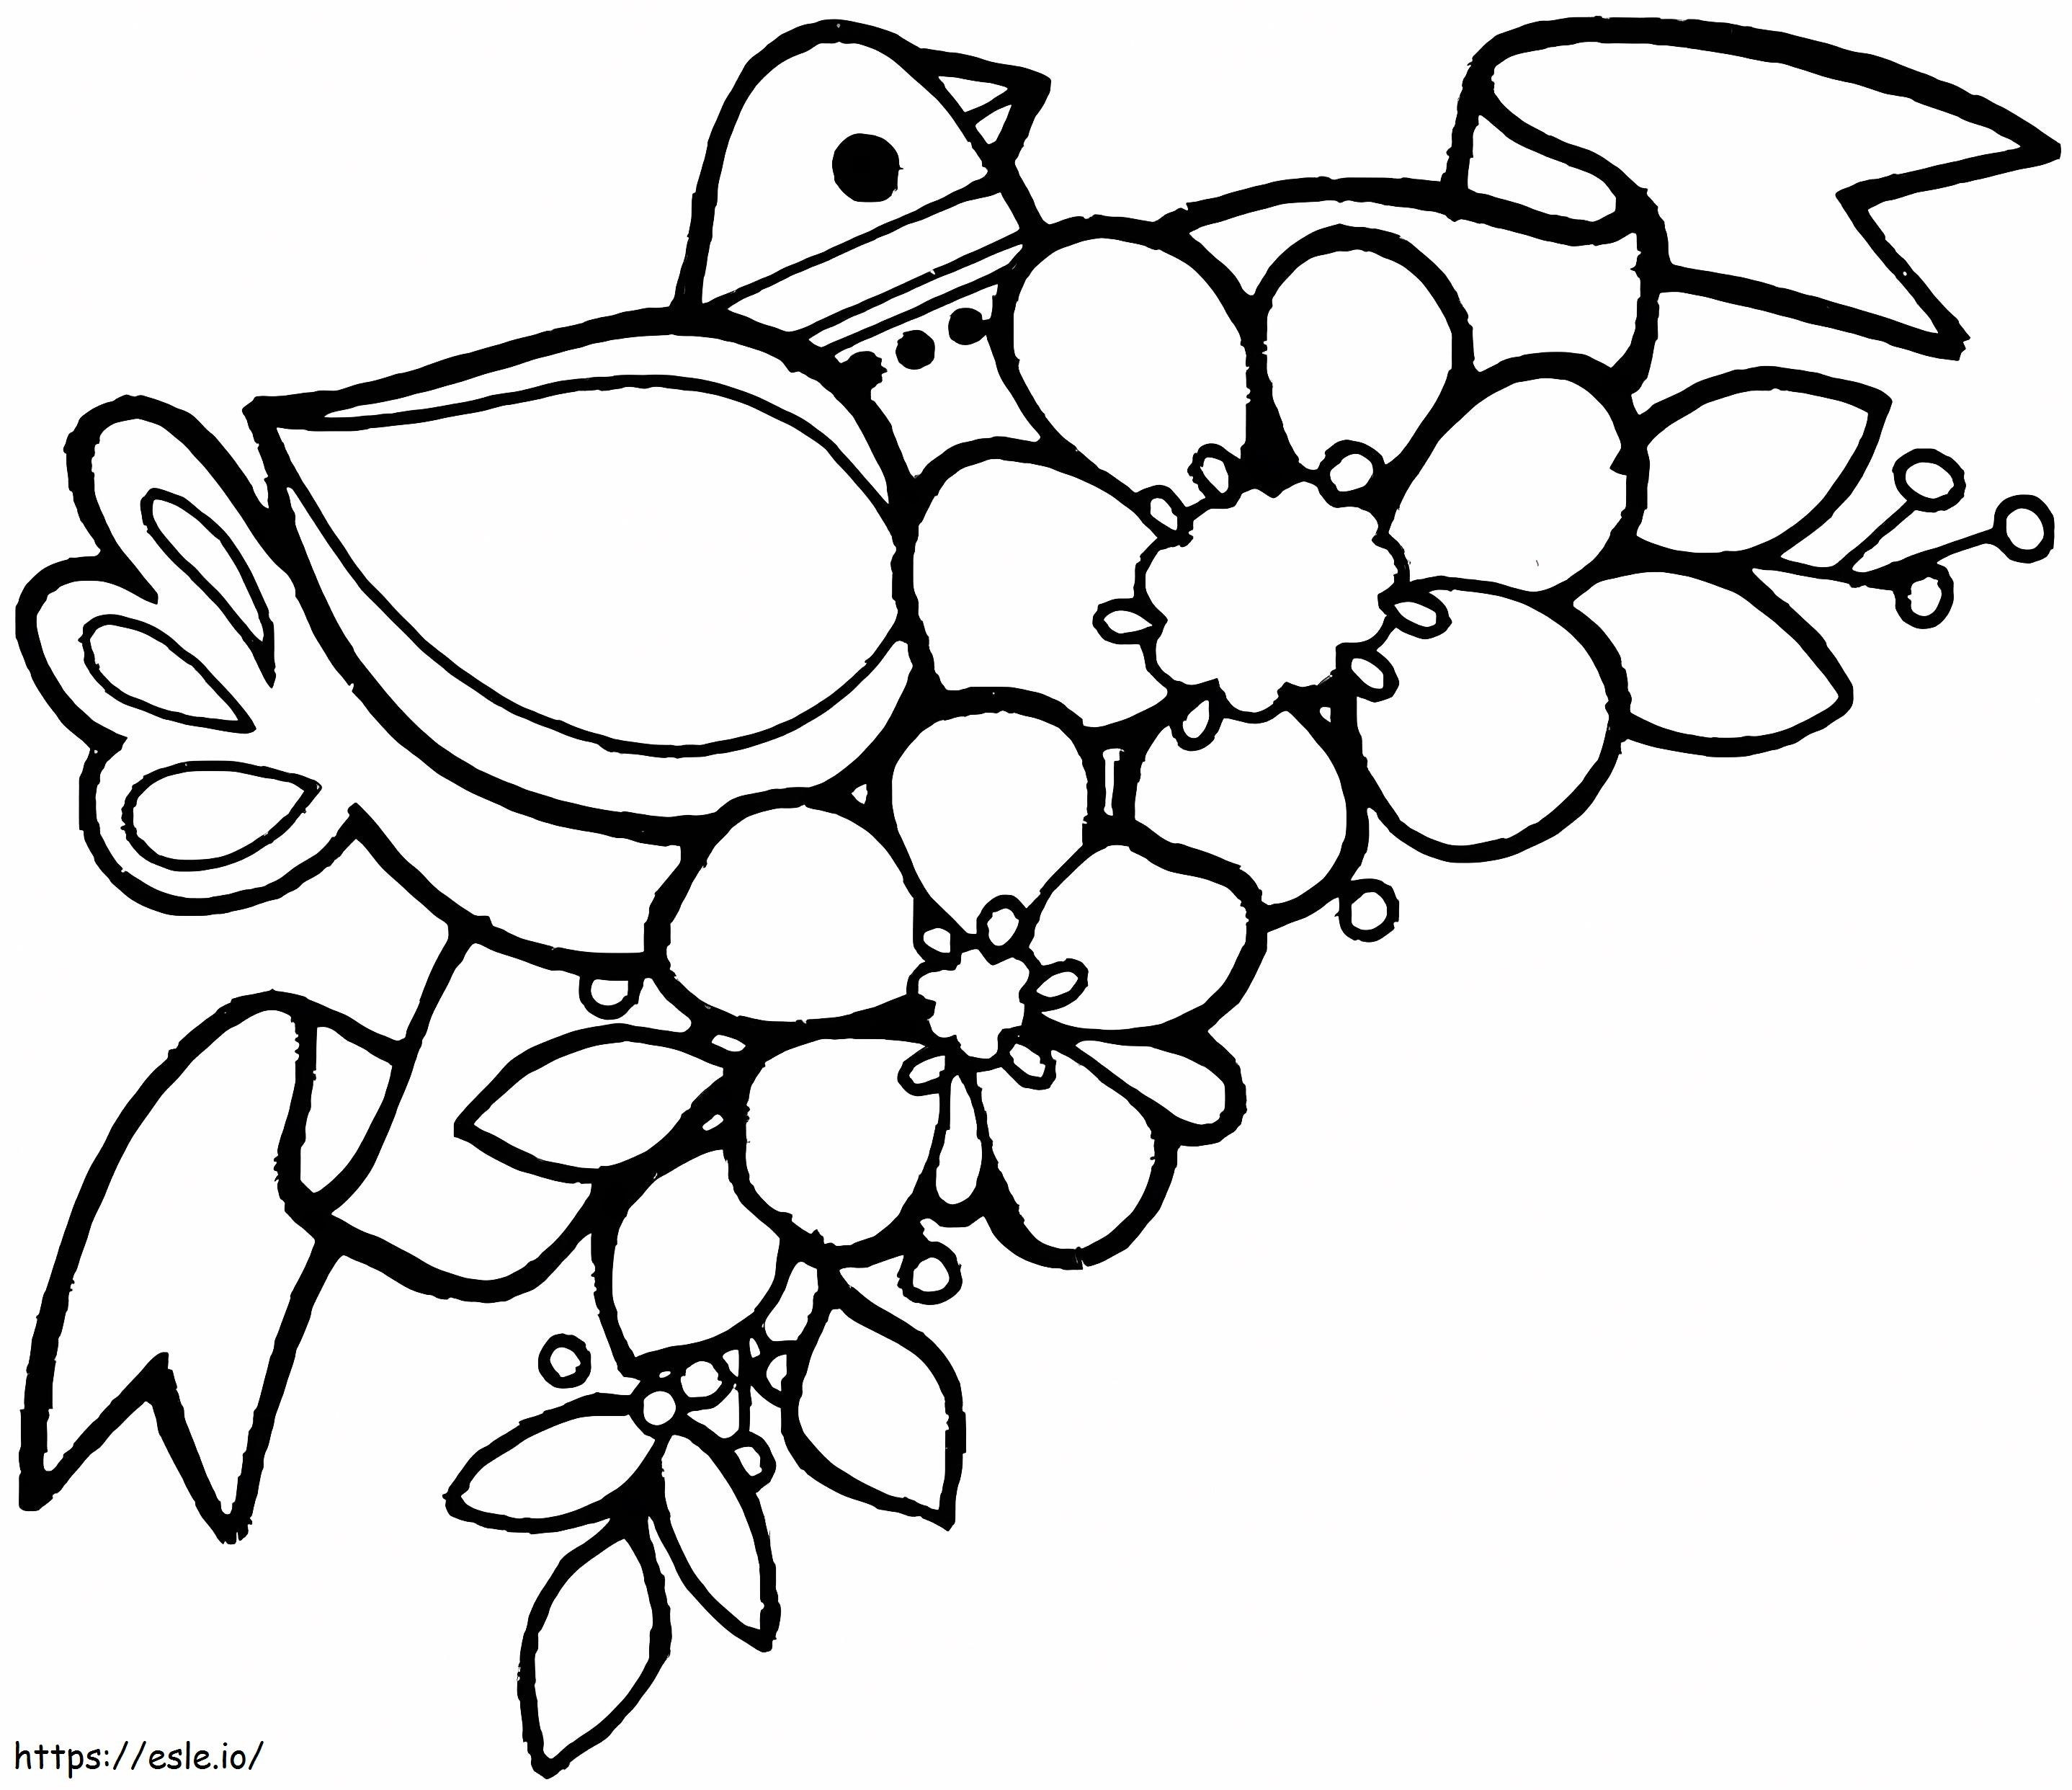 Cute Spring Bird coloring page